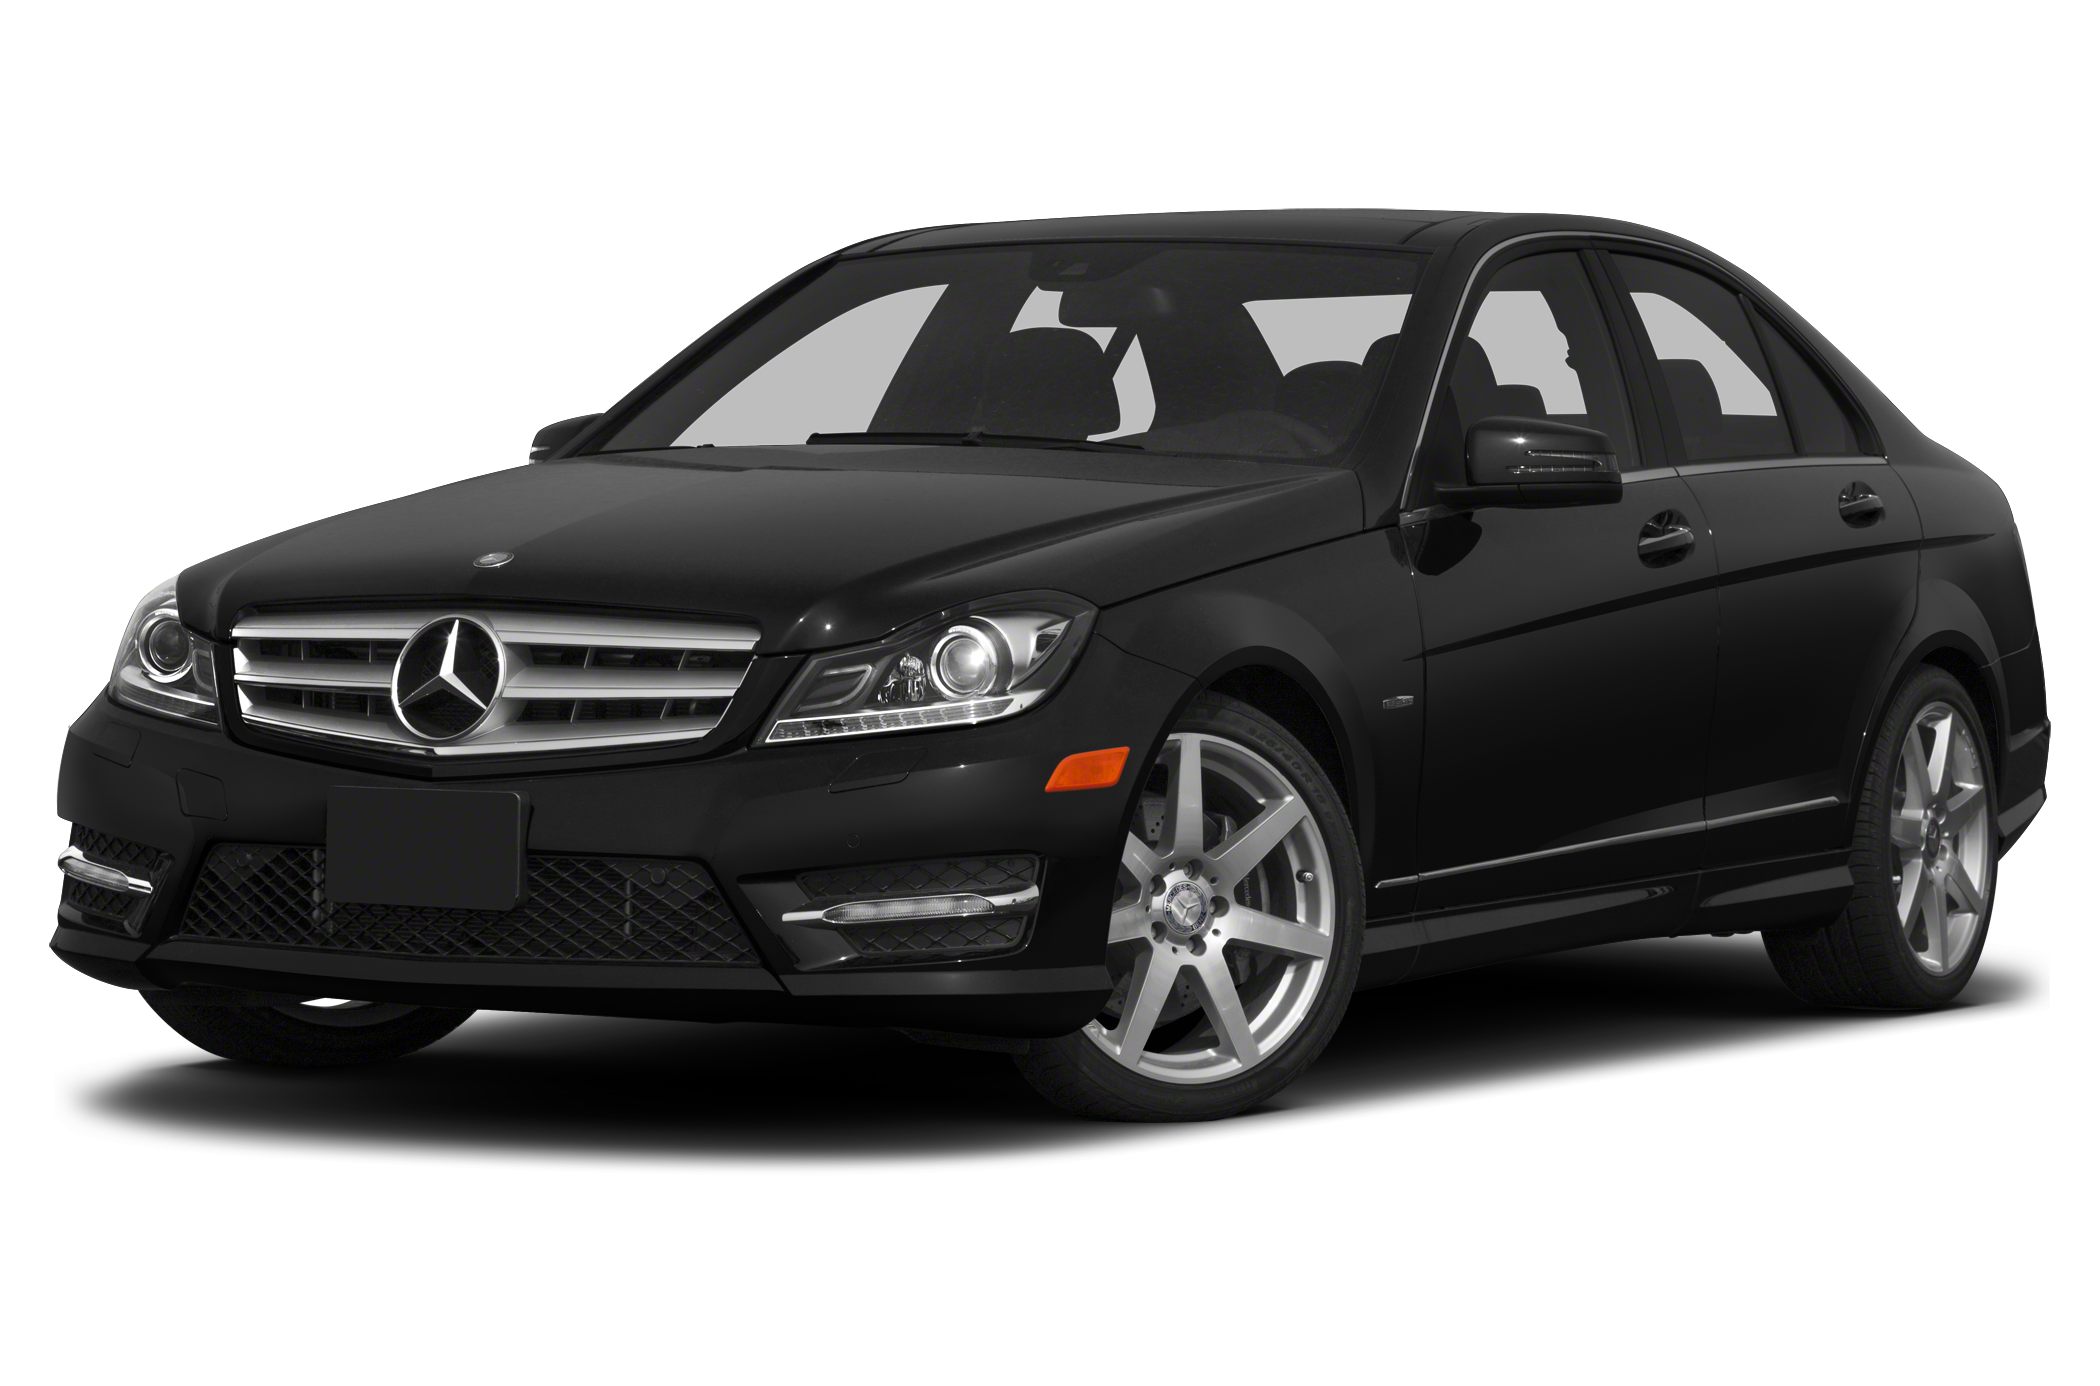 Baton rouge mercedes benz used cars #1